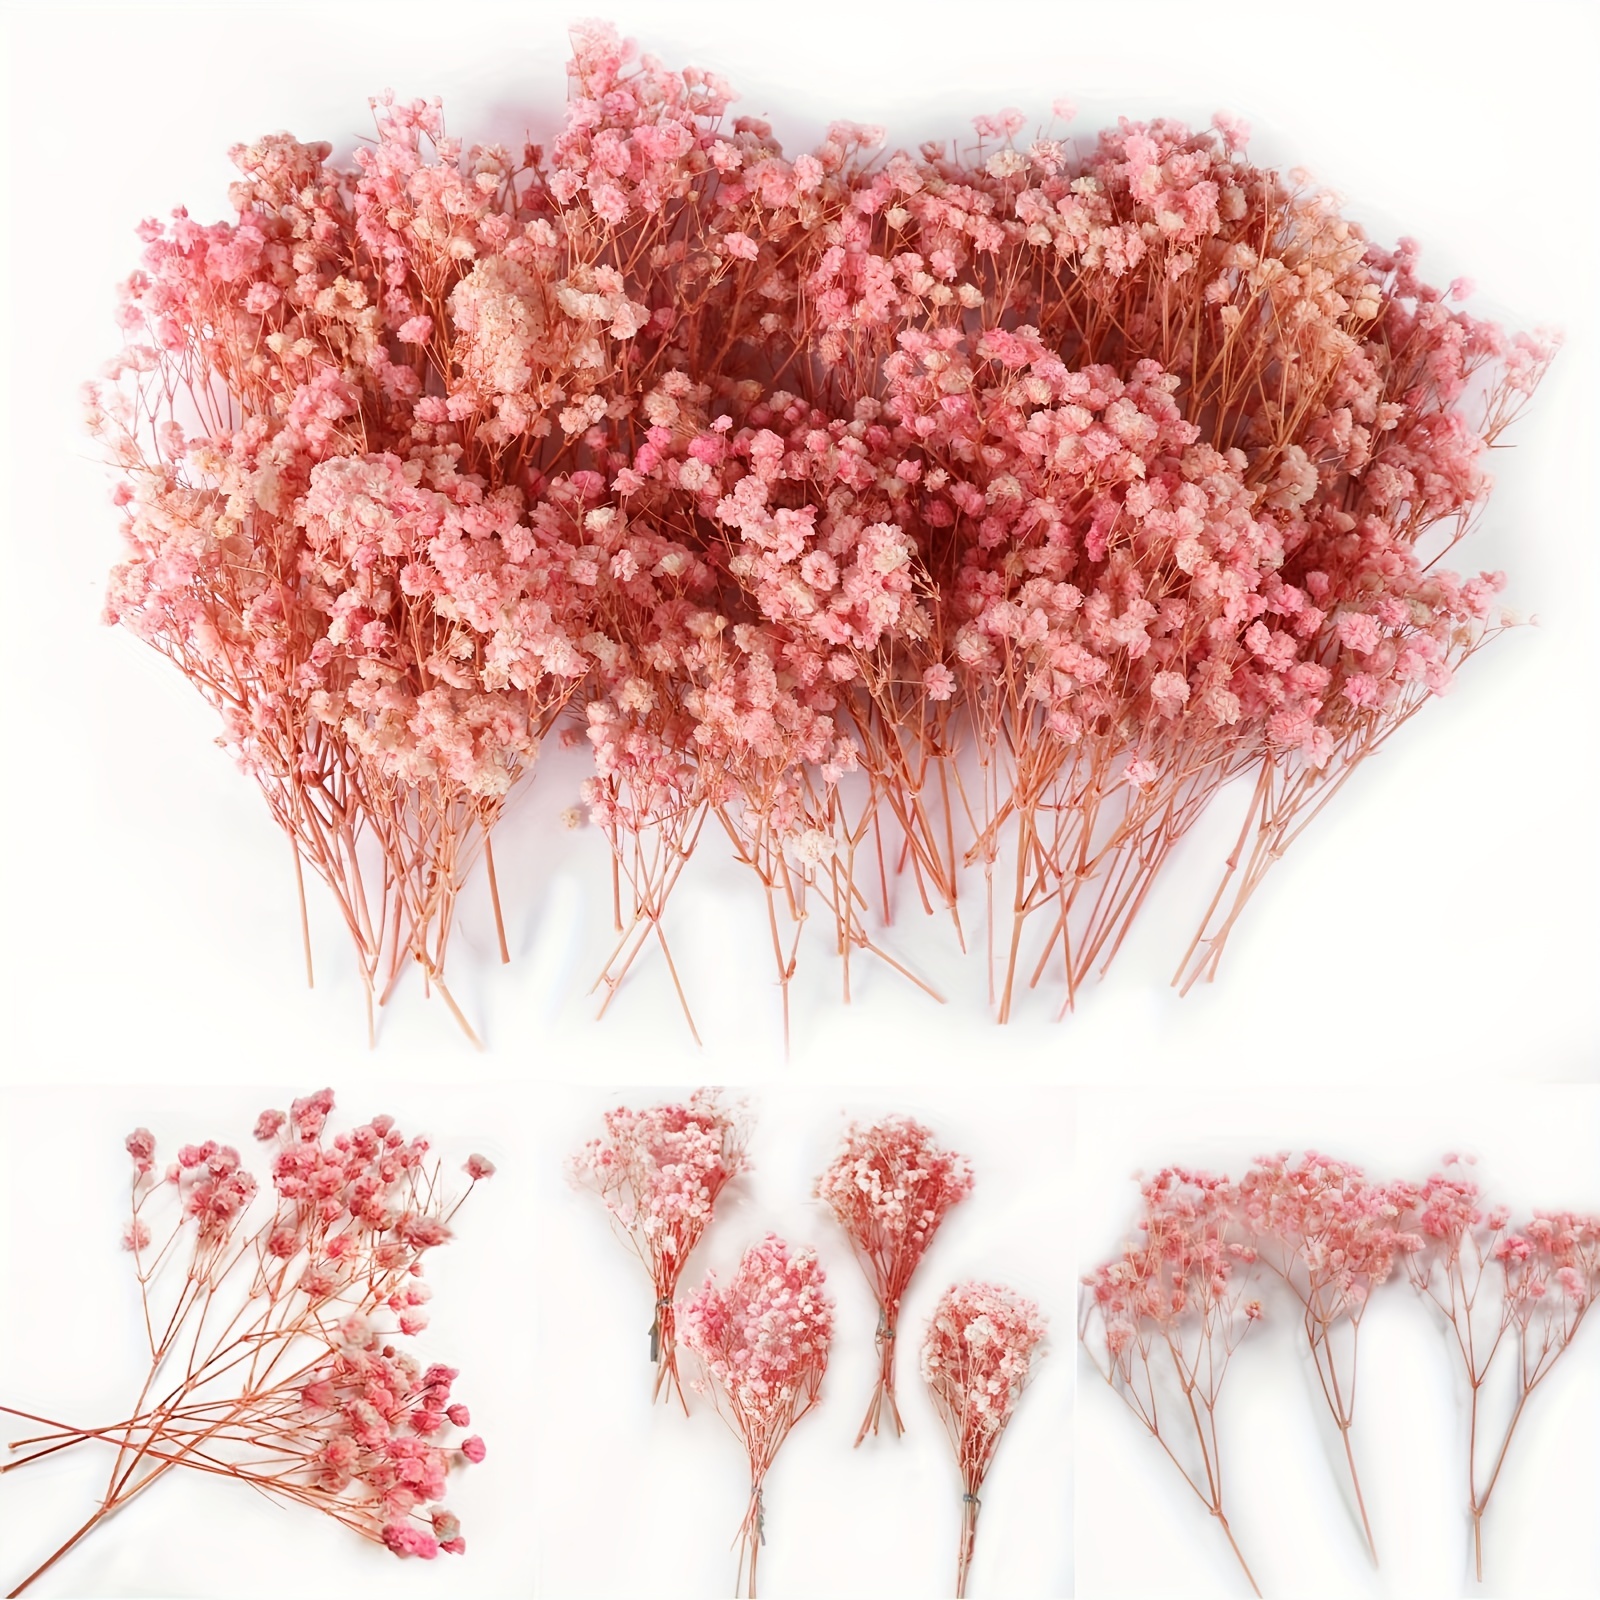 Dried Flowers Baby's Breath Bouquet - 3000+ Pure White Dried Babys